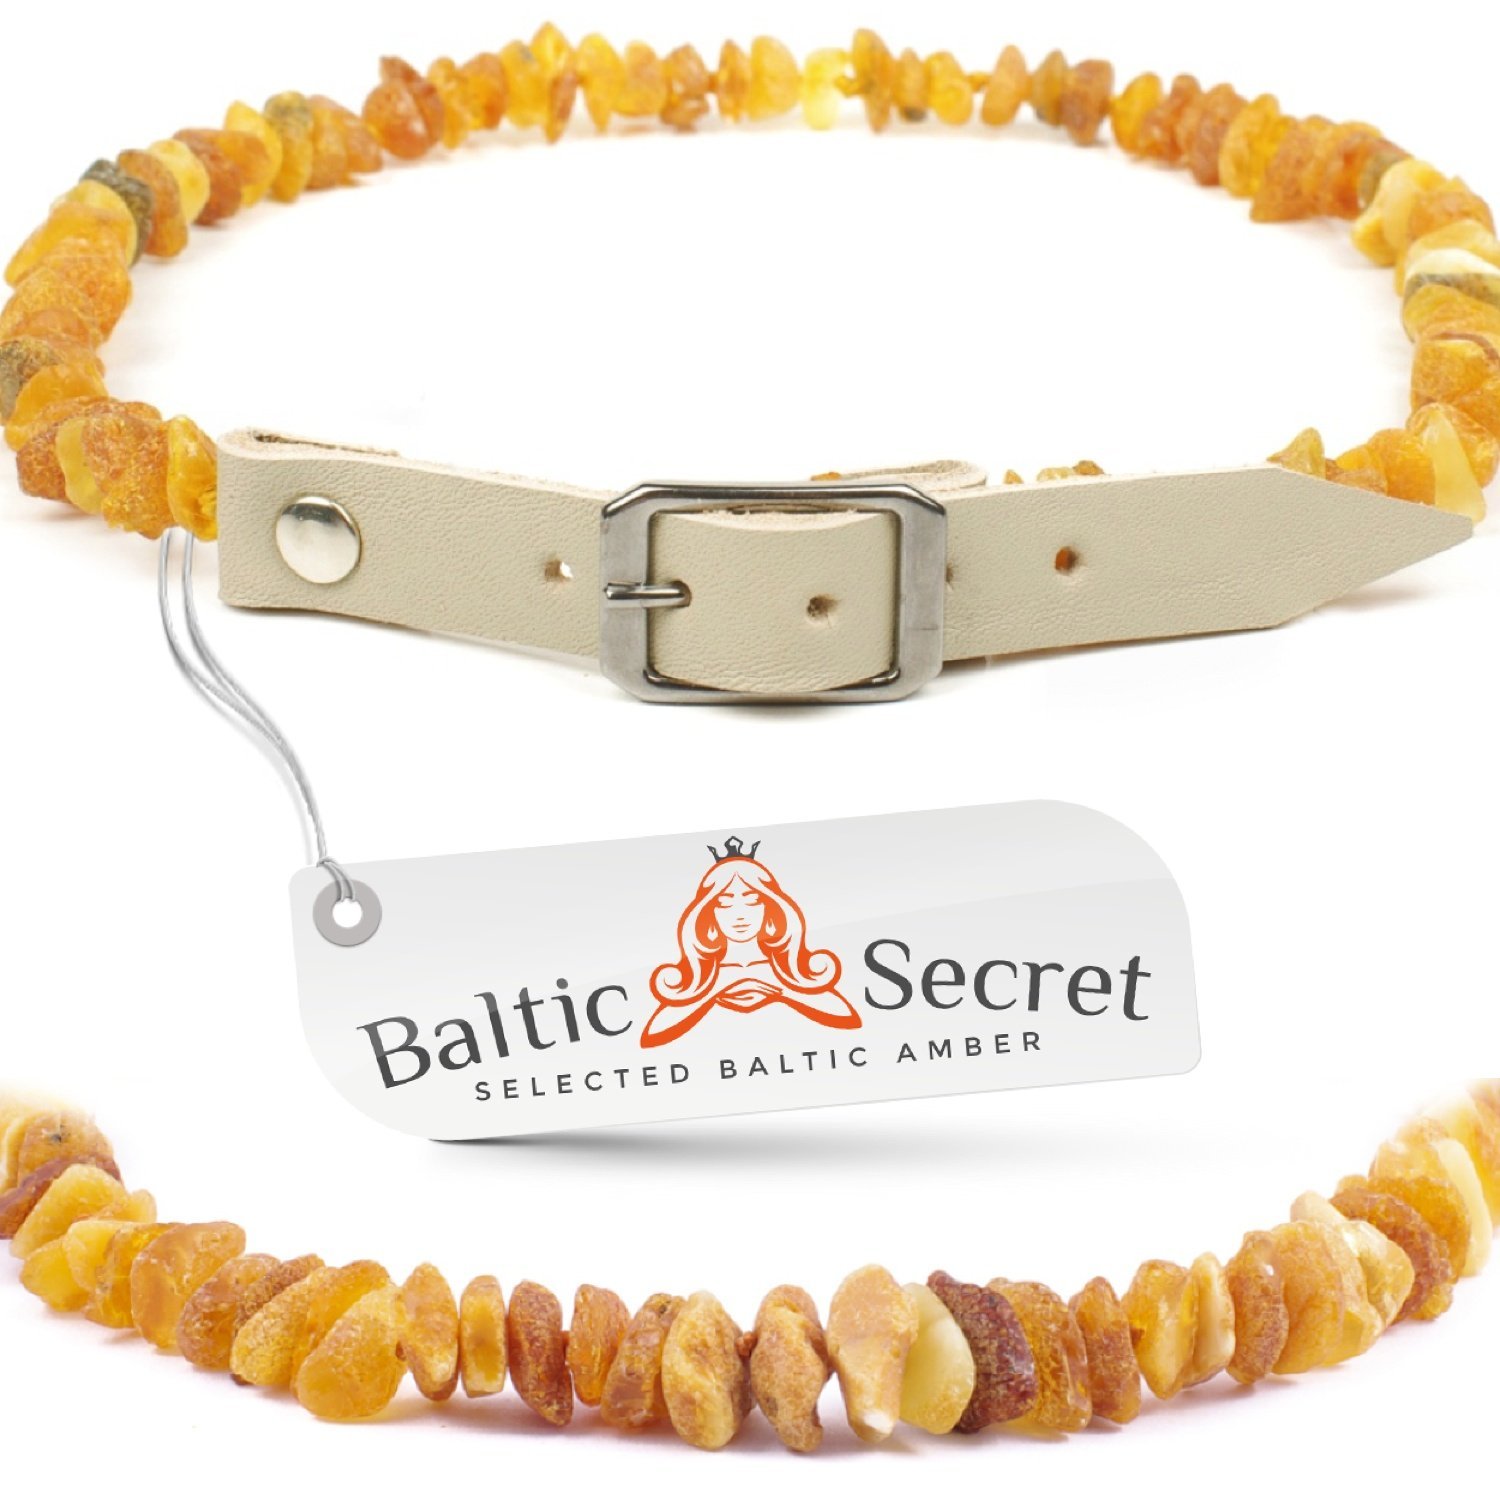 Baltic Secret Flea and Tick Control Collar for Dogs & Cats / Natural Flea Prevention Control and Treatment / Handcrafted from Premium 100% Authentic Baltic Amber That is 50% Higher in Value and Effectiveness